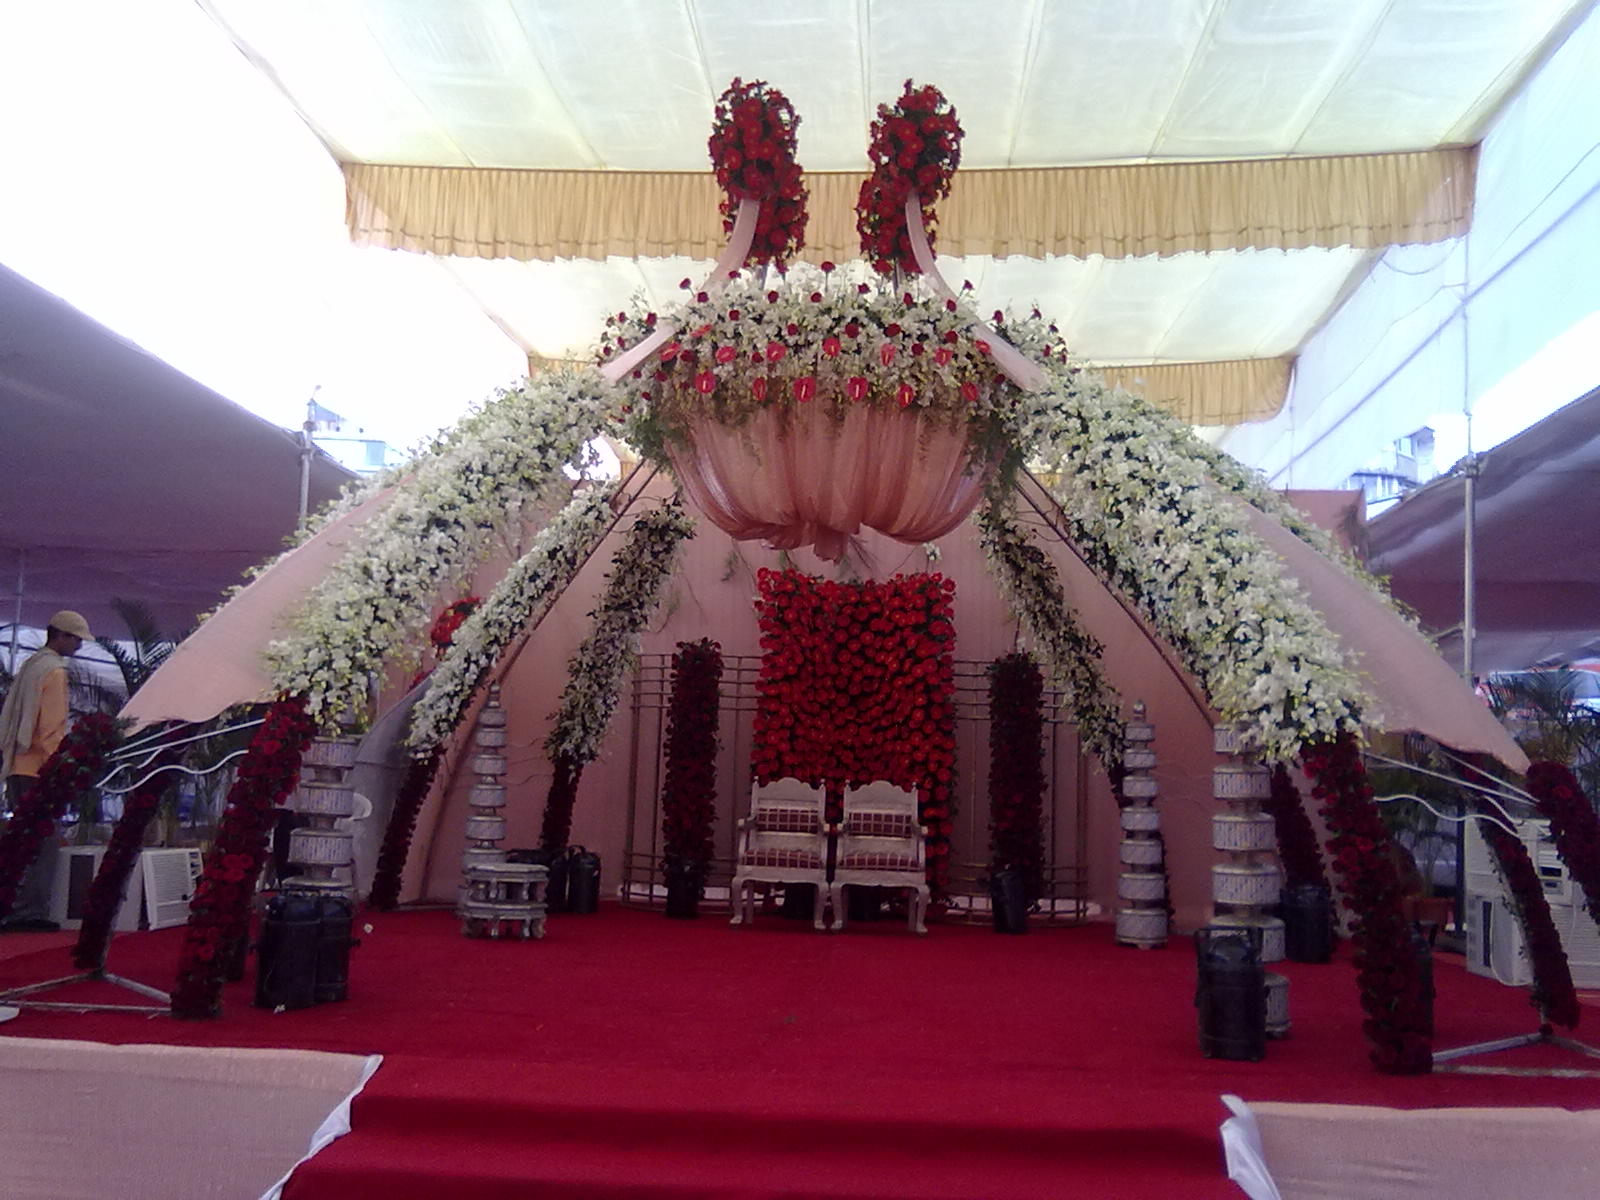 about marriage  marriage  decoration  photos 2013 marriage  